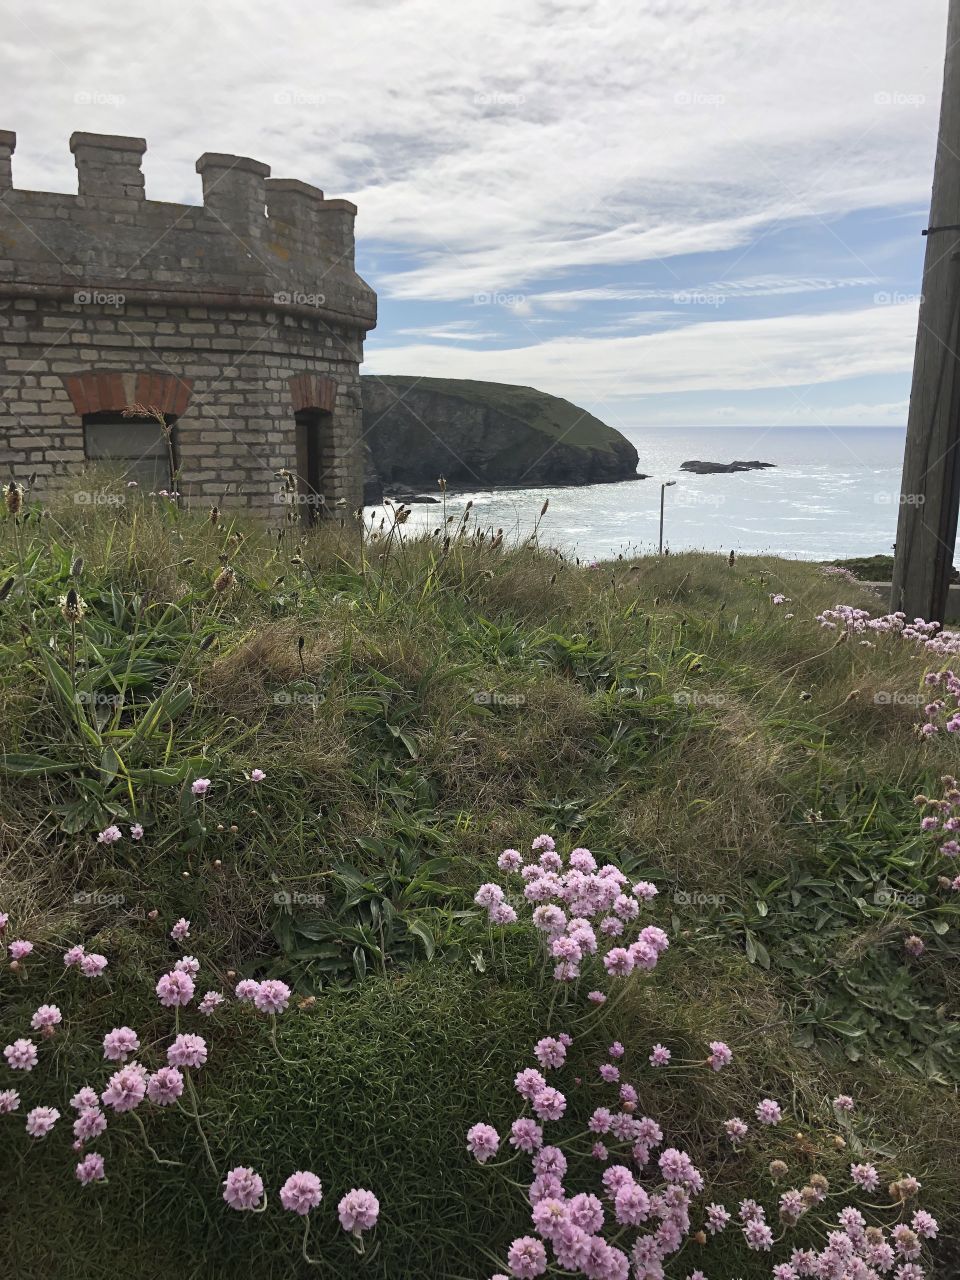 Another photo from the lovely Portreath, impressive because of the added attraction of the beautiful wild flowers.